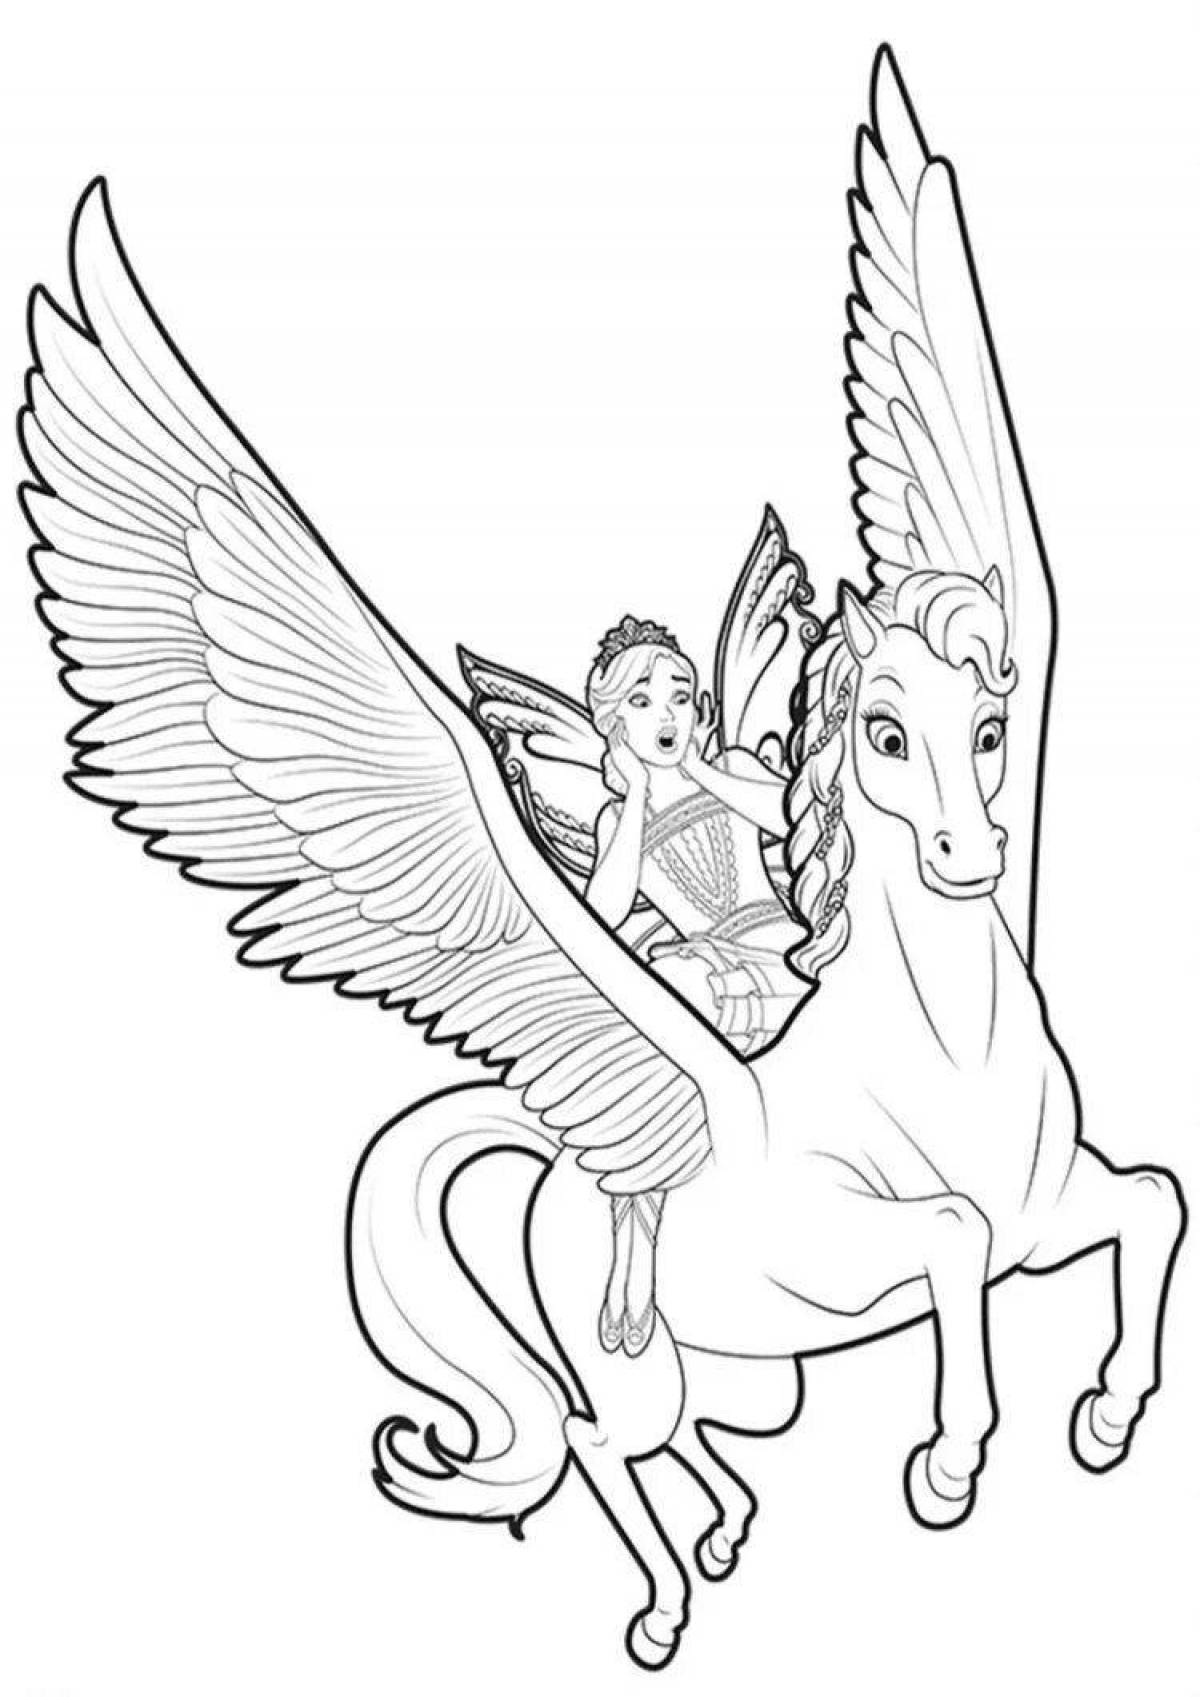 Cute fairy and unicorn coloring pages